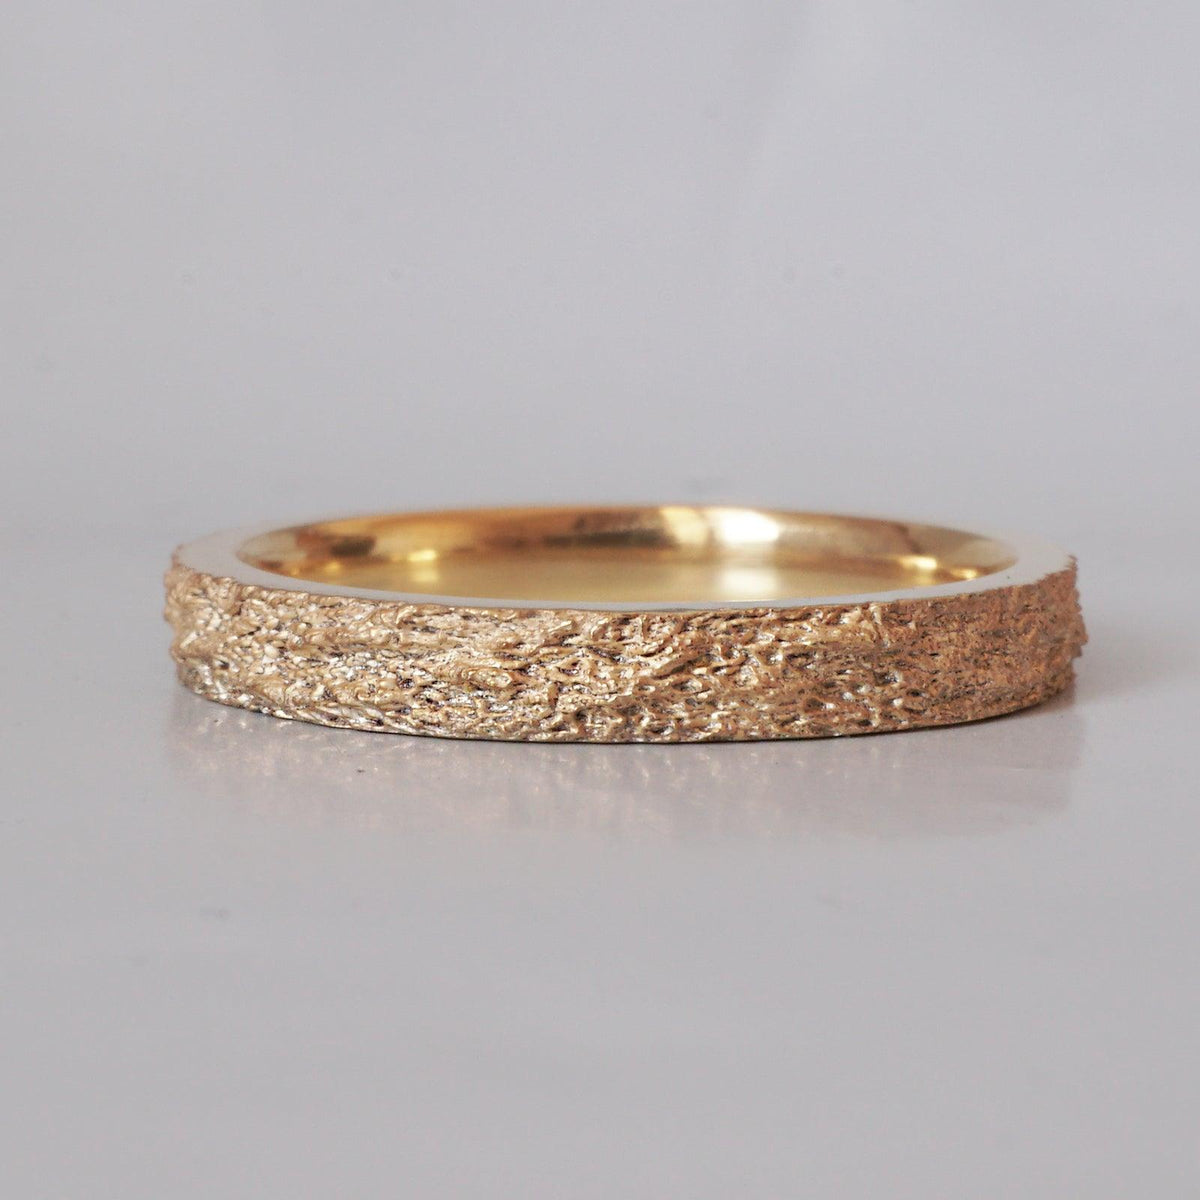 Meteoroid Ring Band in Sterling Silver, 14K and 18K Gold, 3mm - Tippy Taste Jewelry